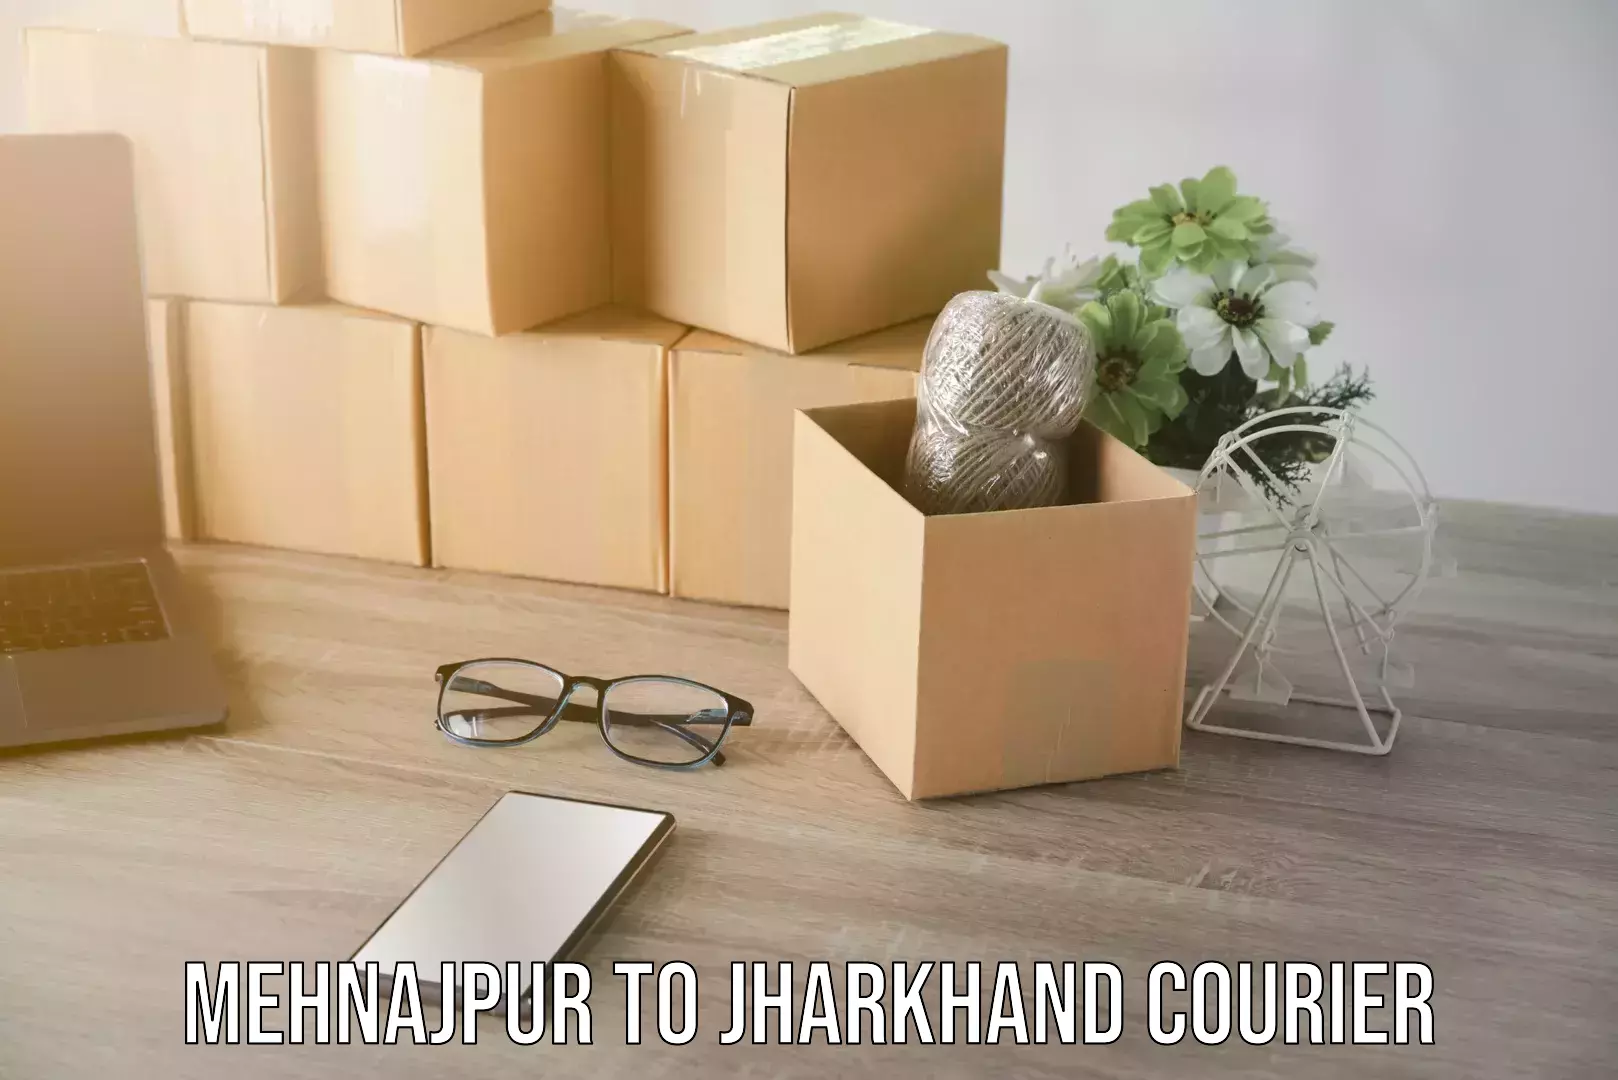 Home relocation experts Mehnajpur to Jharkhand